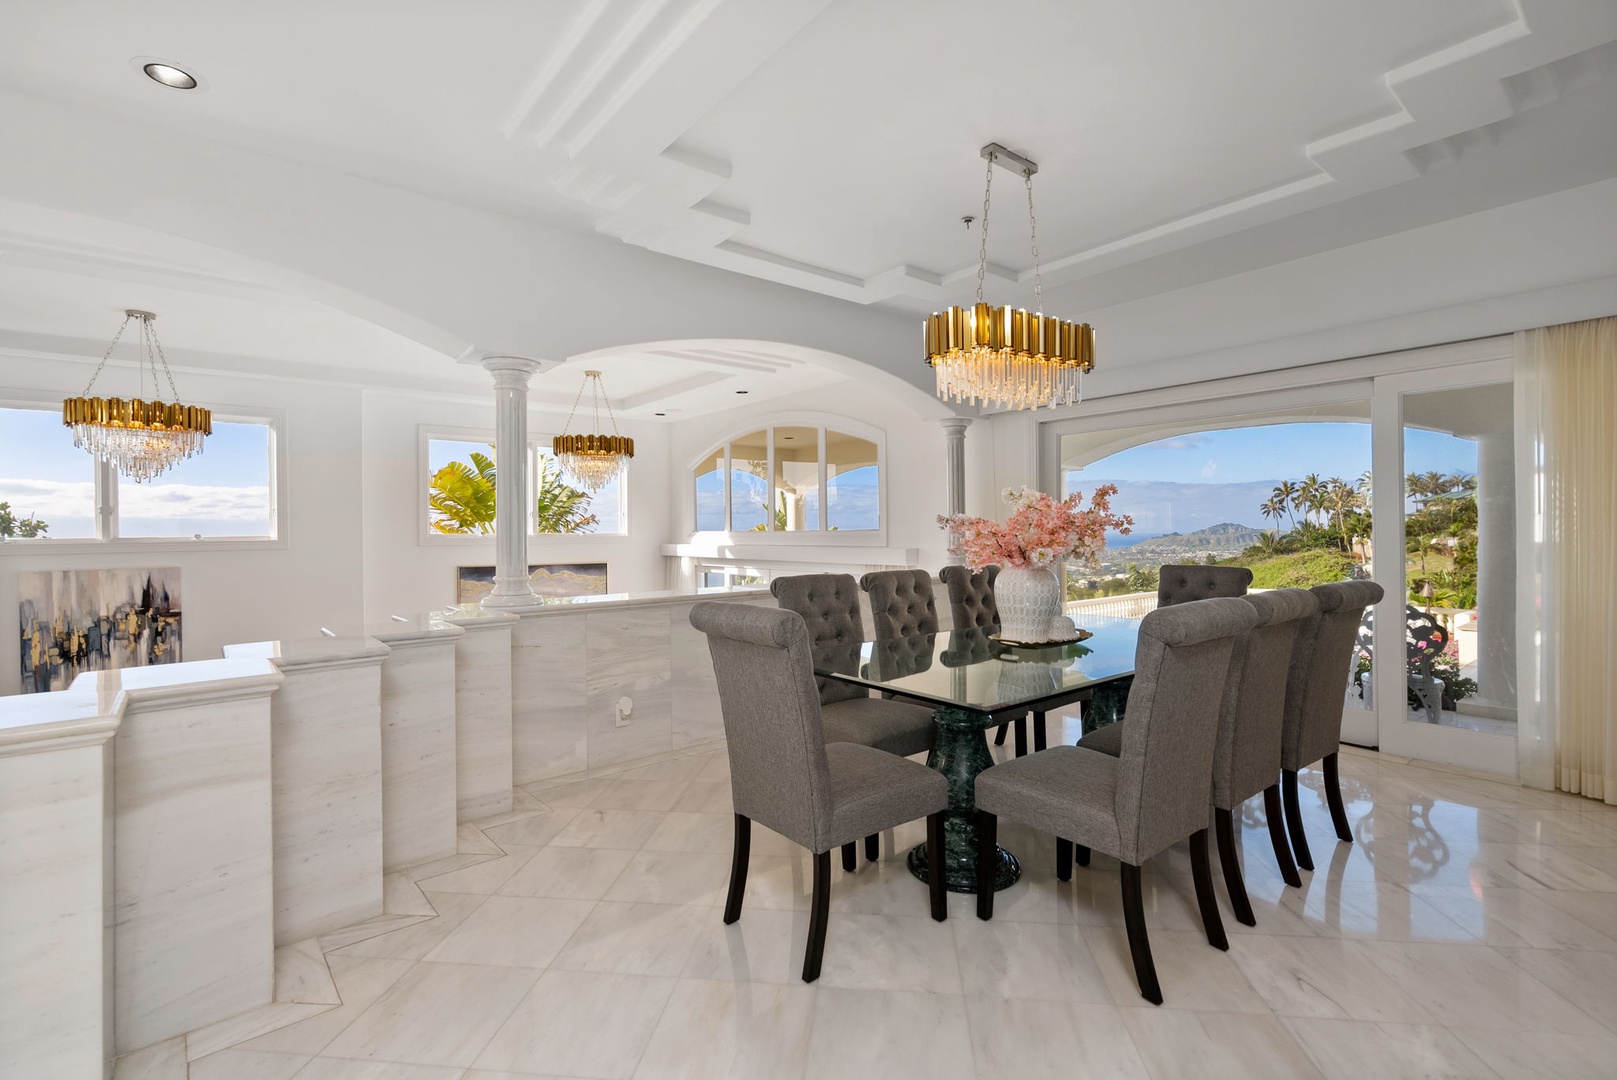 Honolulu Vacation Rentals, Hawaii Ridge Getaway - Elegant dining table with table for eight with lots of outdoor views.